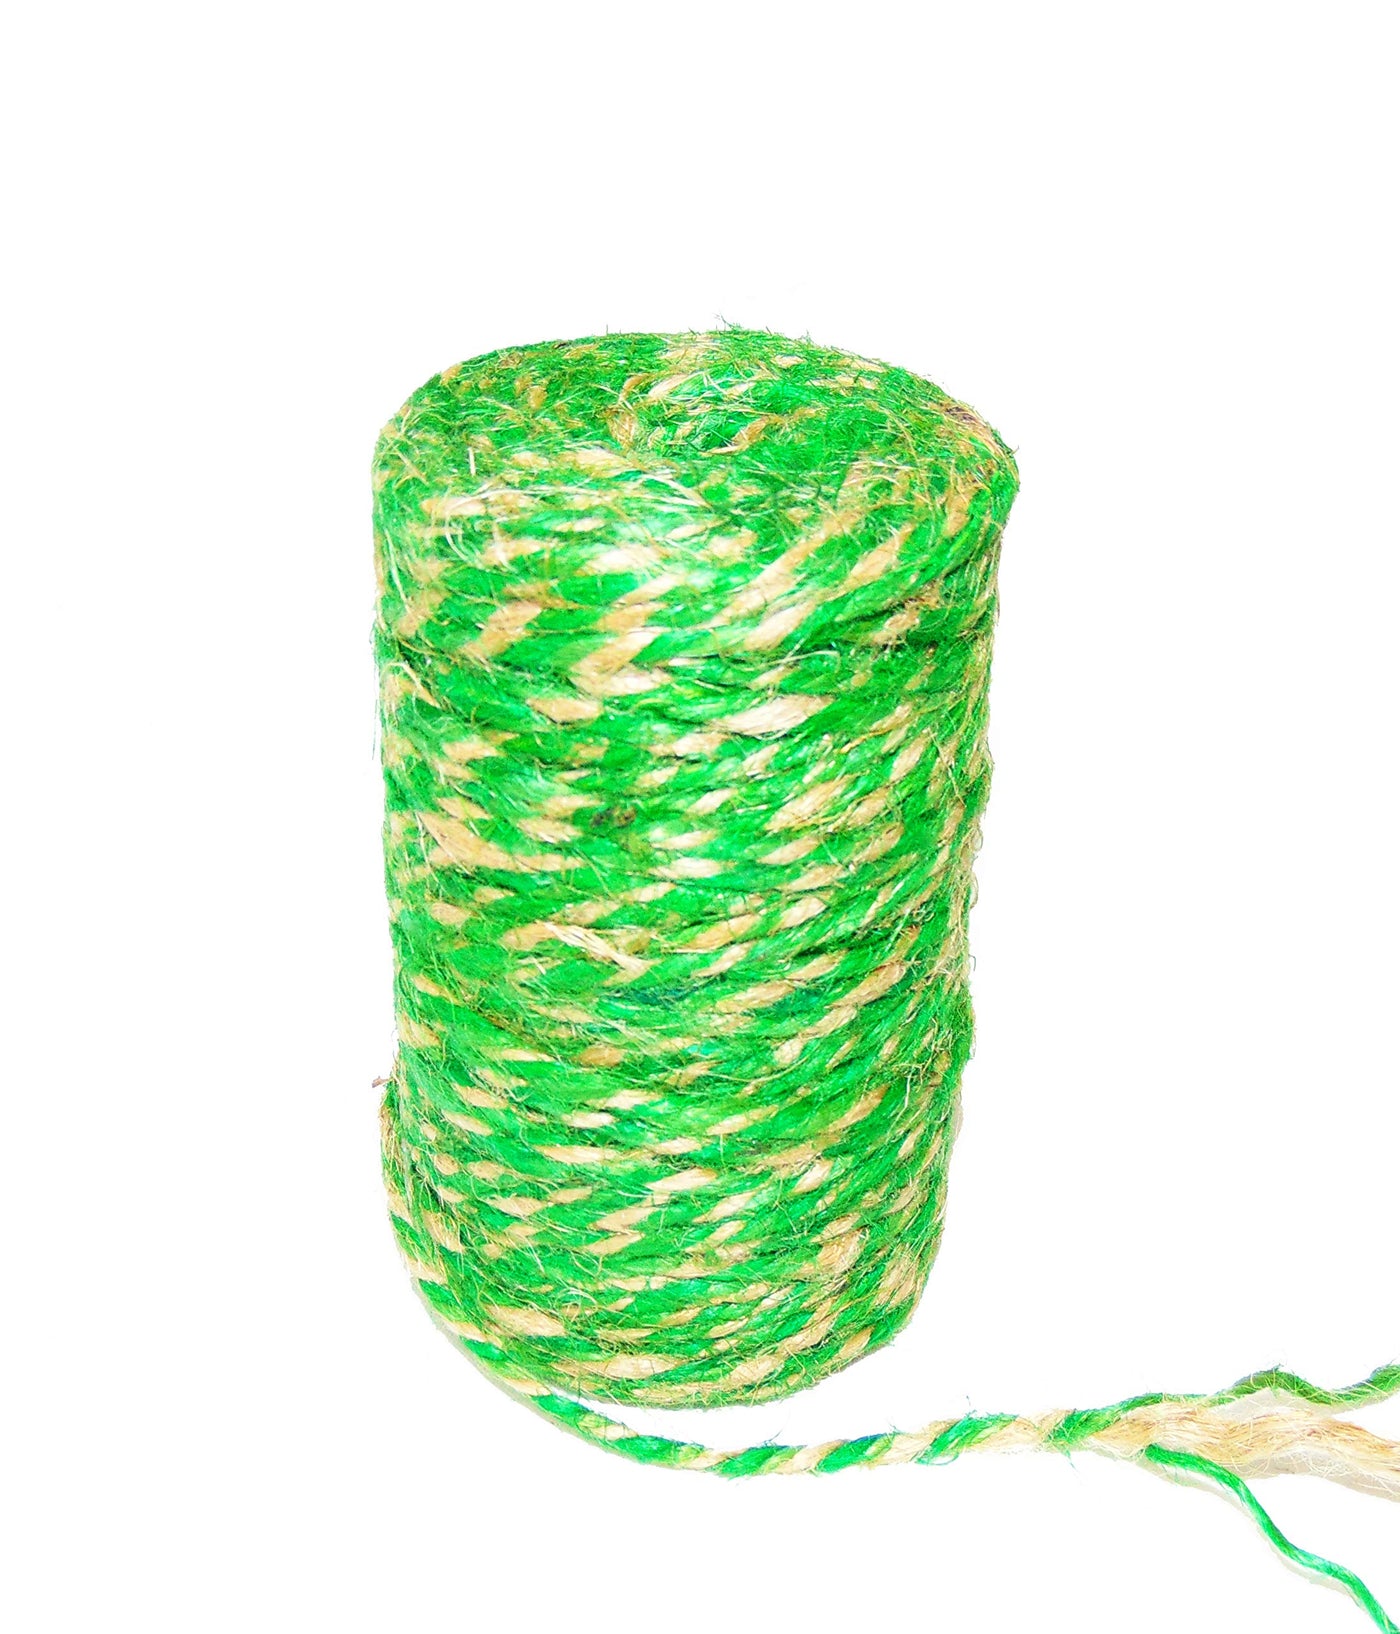 AAYU Jute Twine 200 Feet 3 Ply Green and Natural Colored Twisted Hemp Yarn for Arts and Crafts Packing Gift Wrapping Decorations Gardening